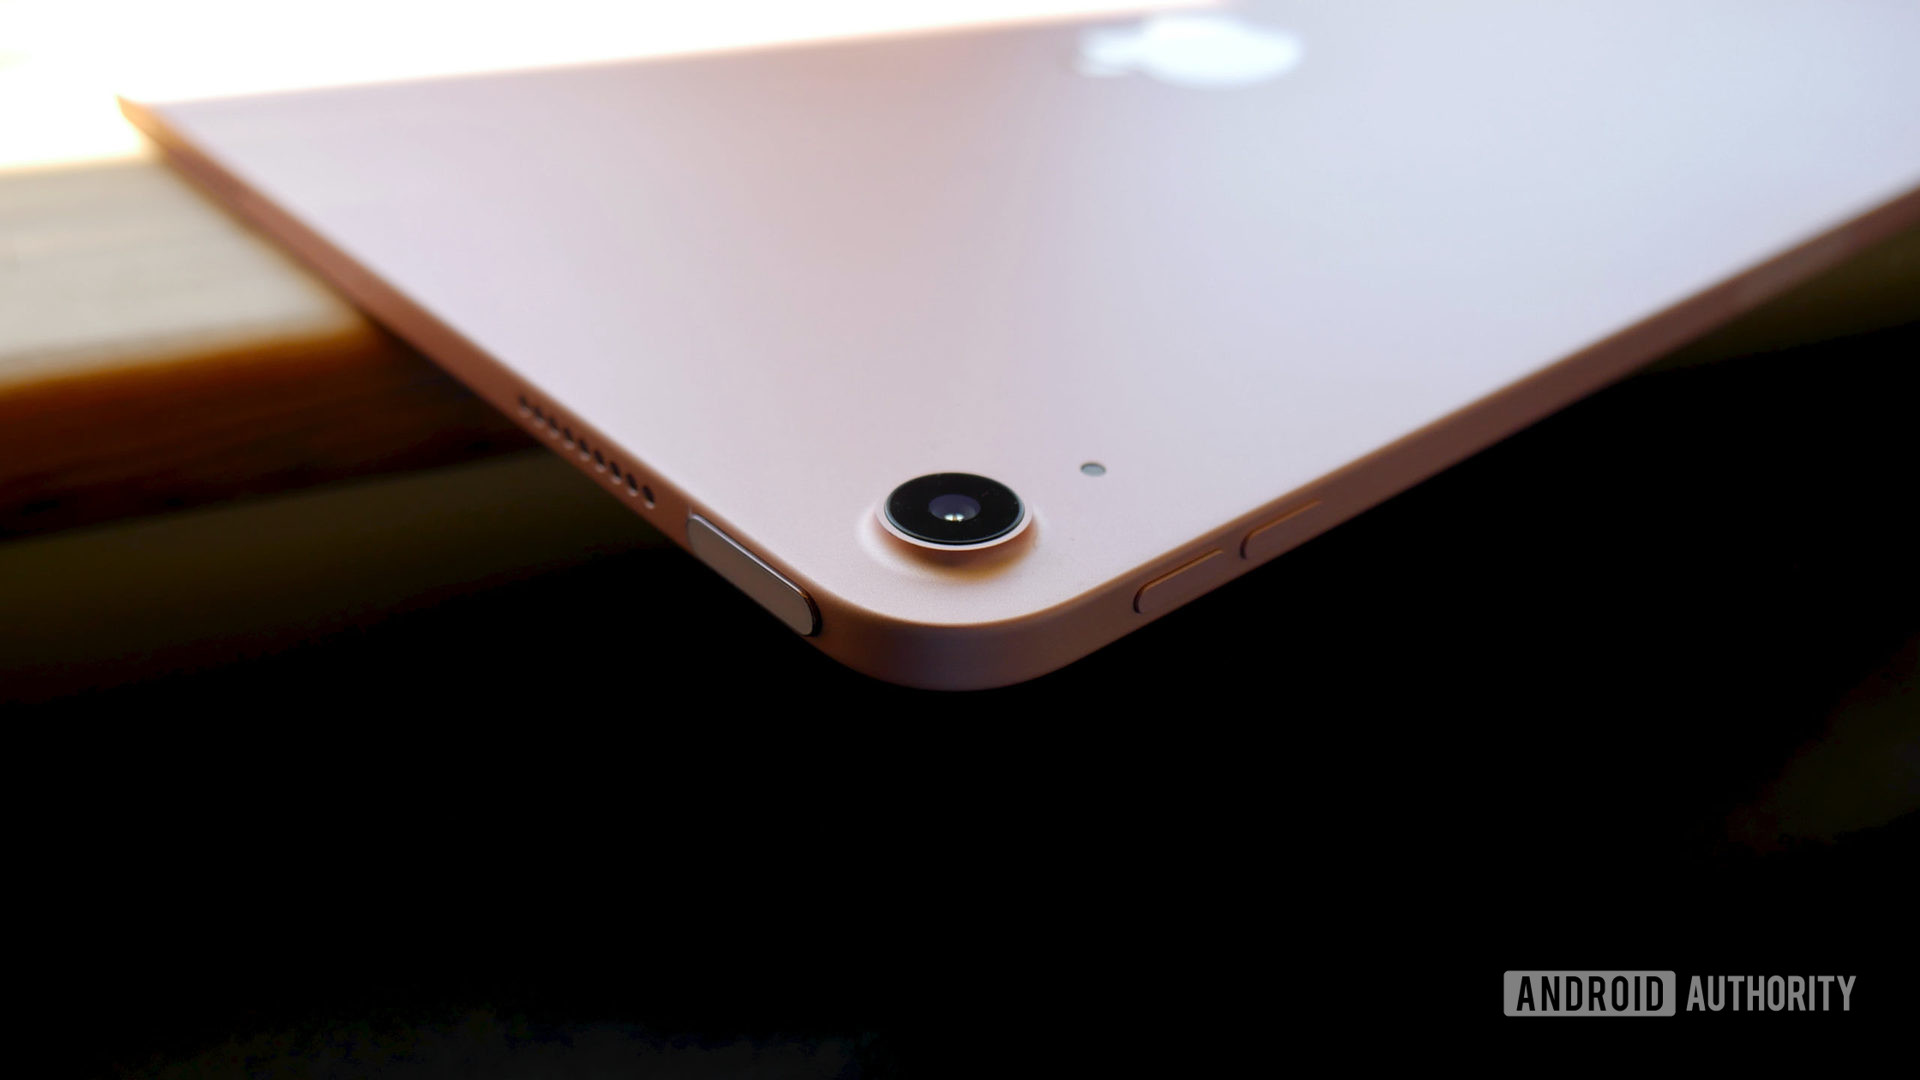 apple ipad air 2020 review camera touch id